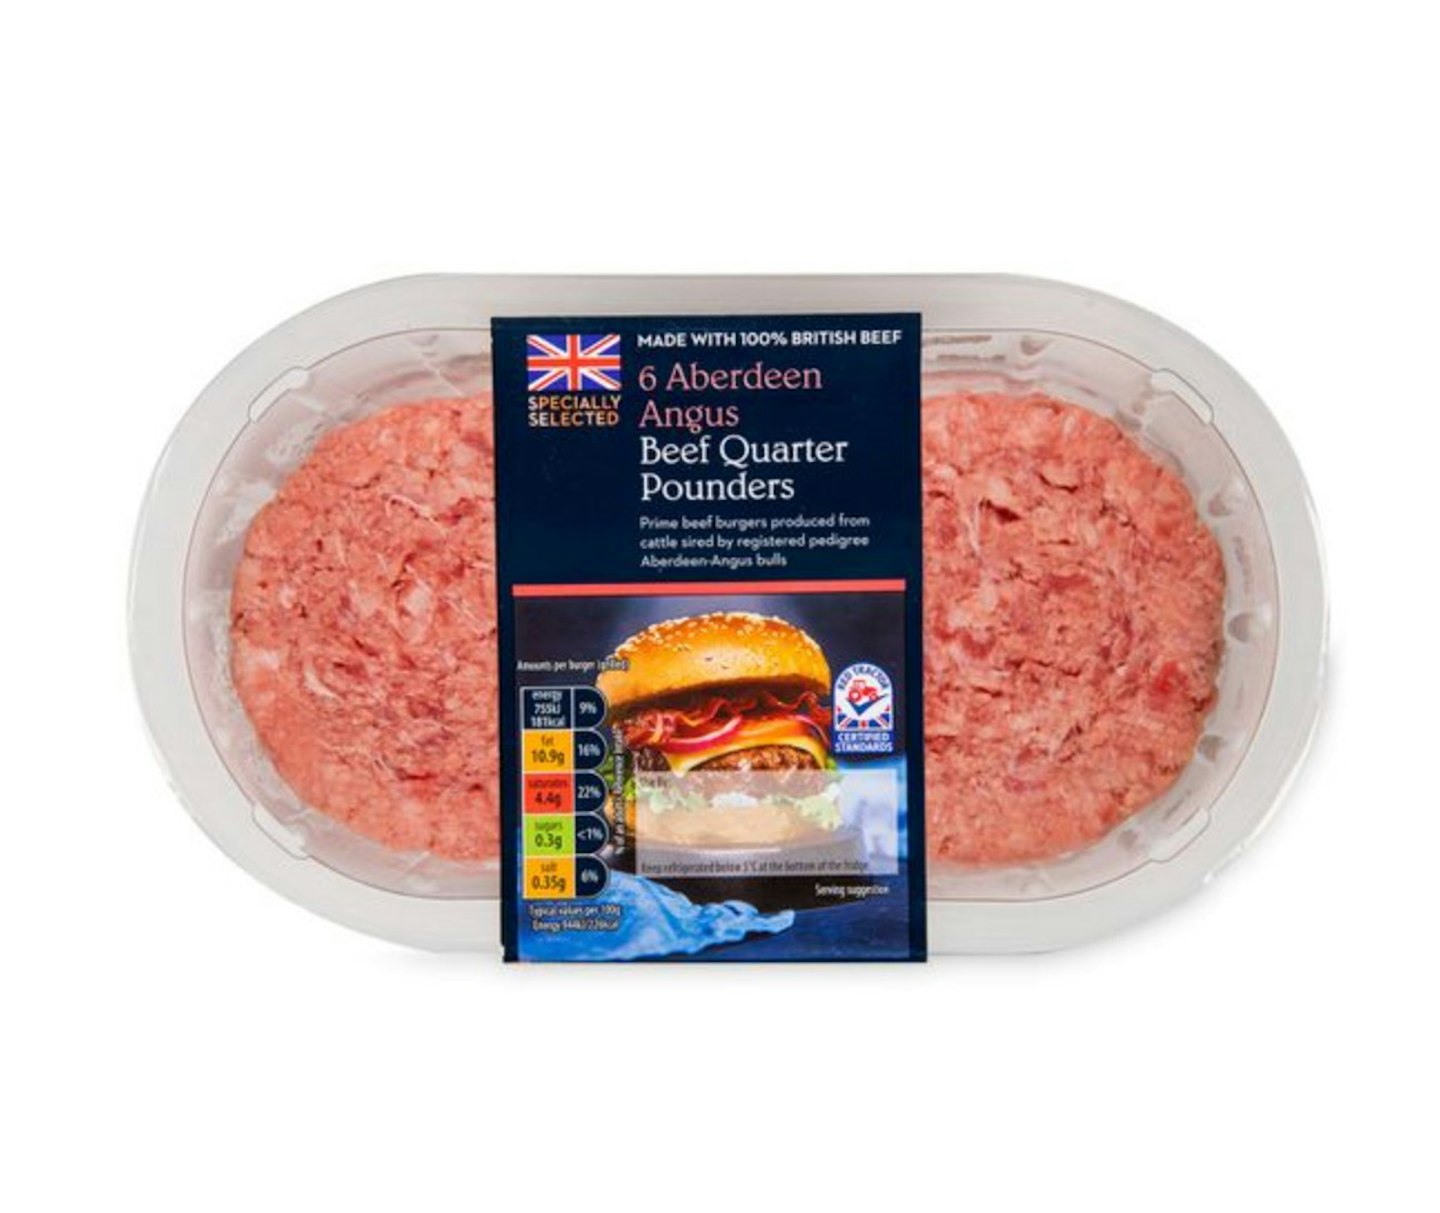 Specially Selected Aberdeen Angus Beef Quarter Pounders 681g/6 Pack